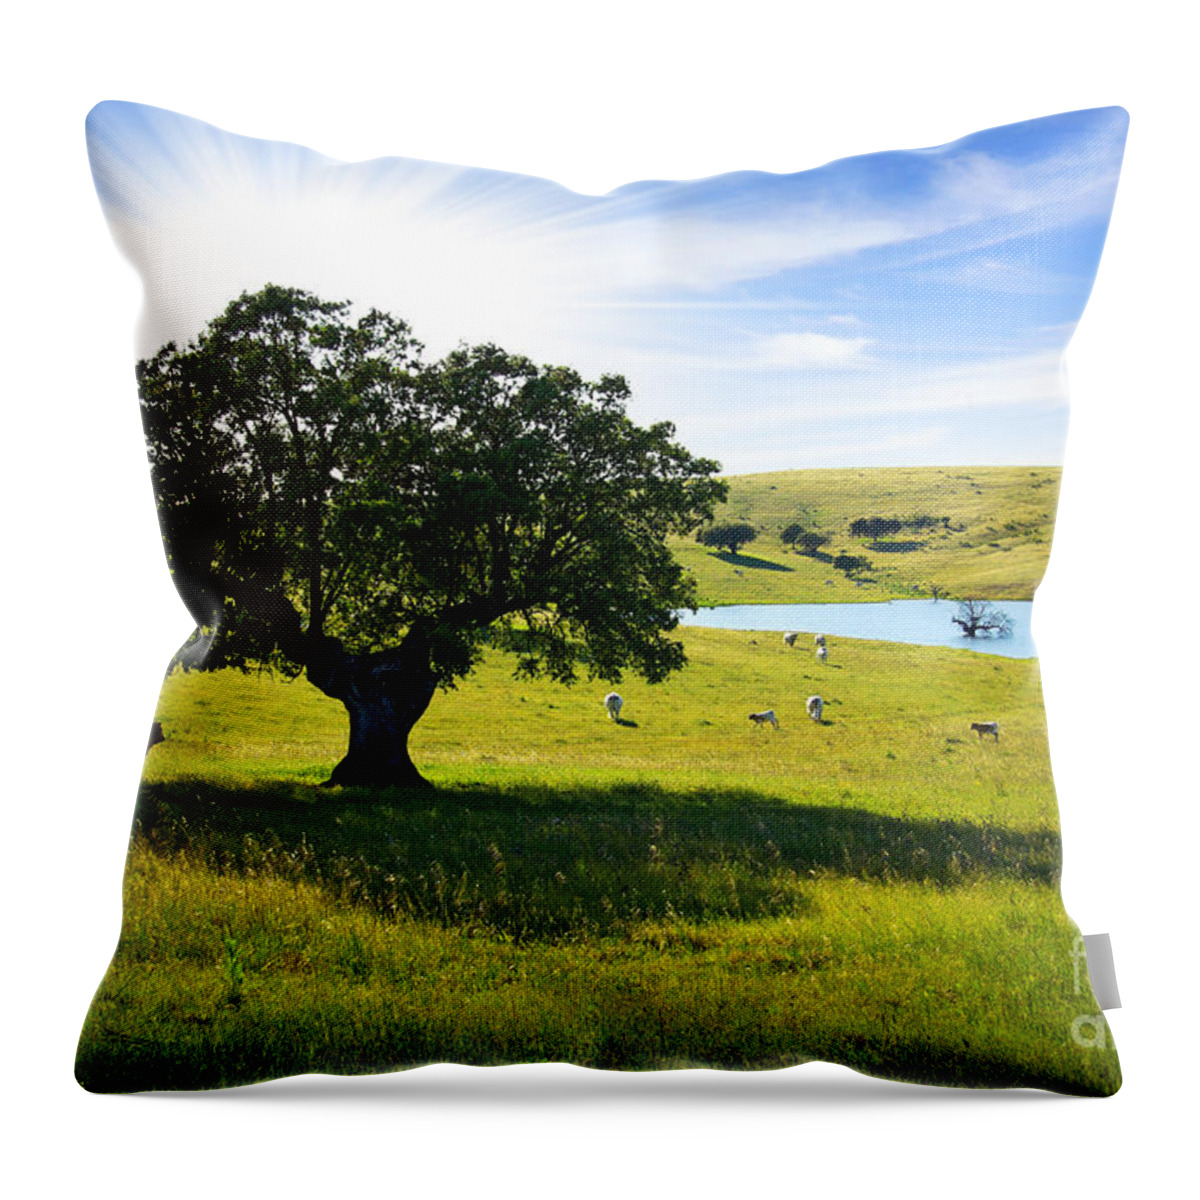 Agriculture Throw Pillow featuring the photograph Pasturing cows by Carlos Caetano